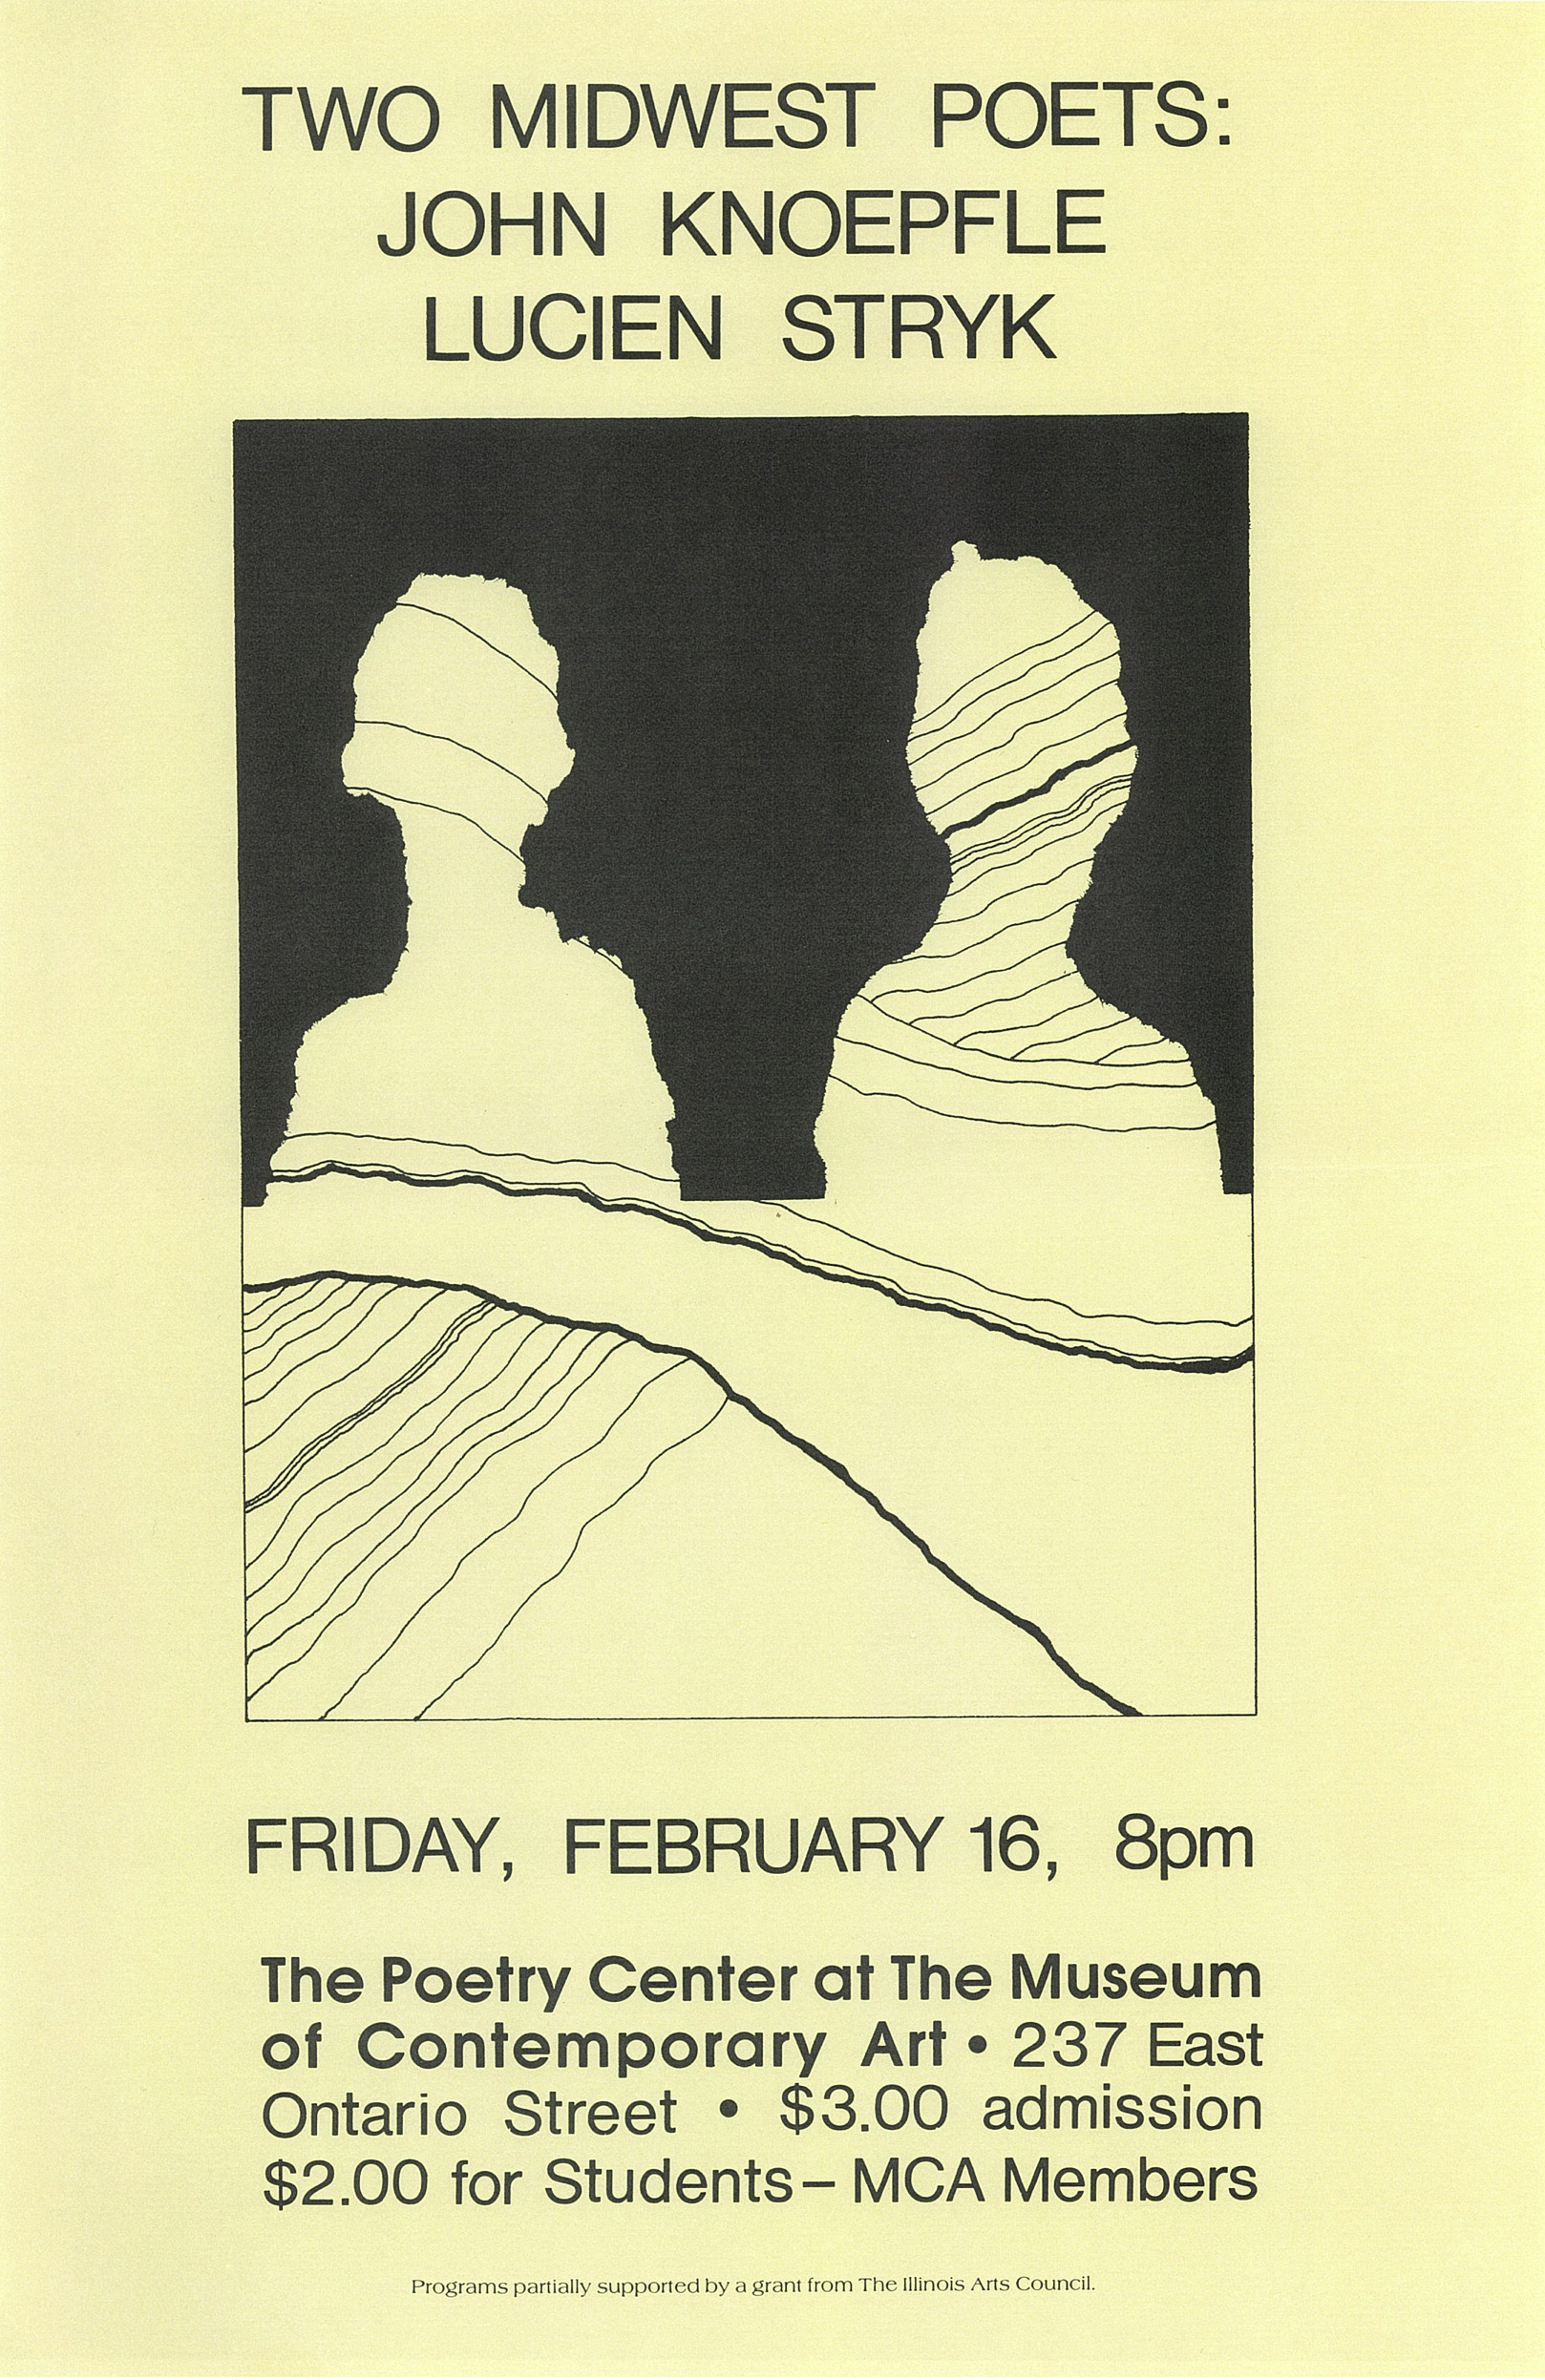 Vintage poster of Two Midwest Poets: John Knoepfle and Lucien Stryk reading at the Poetry Center of Chicago.